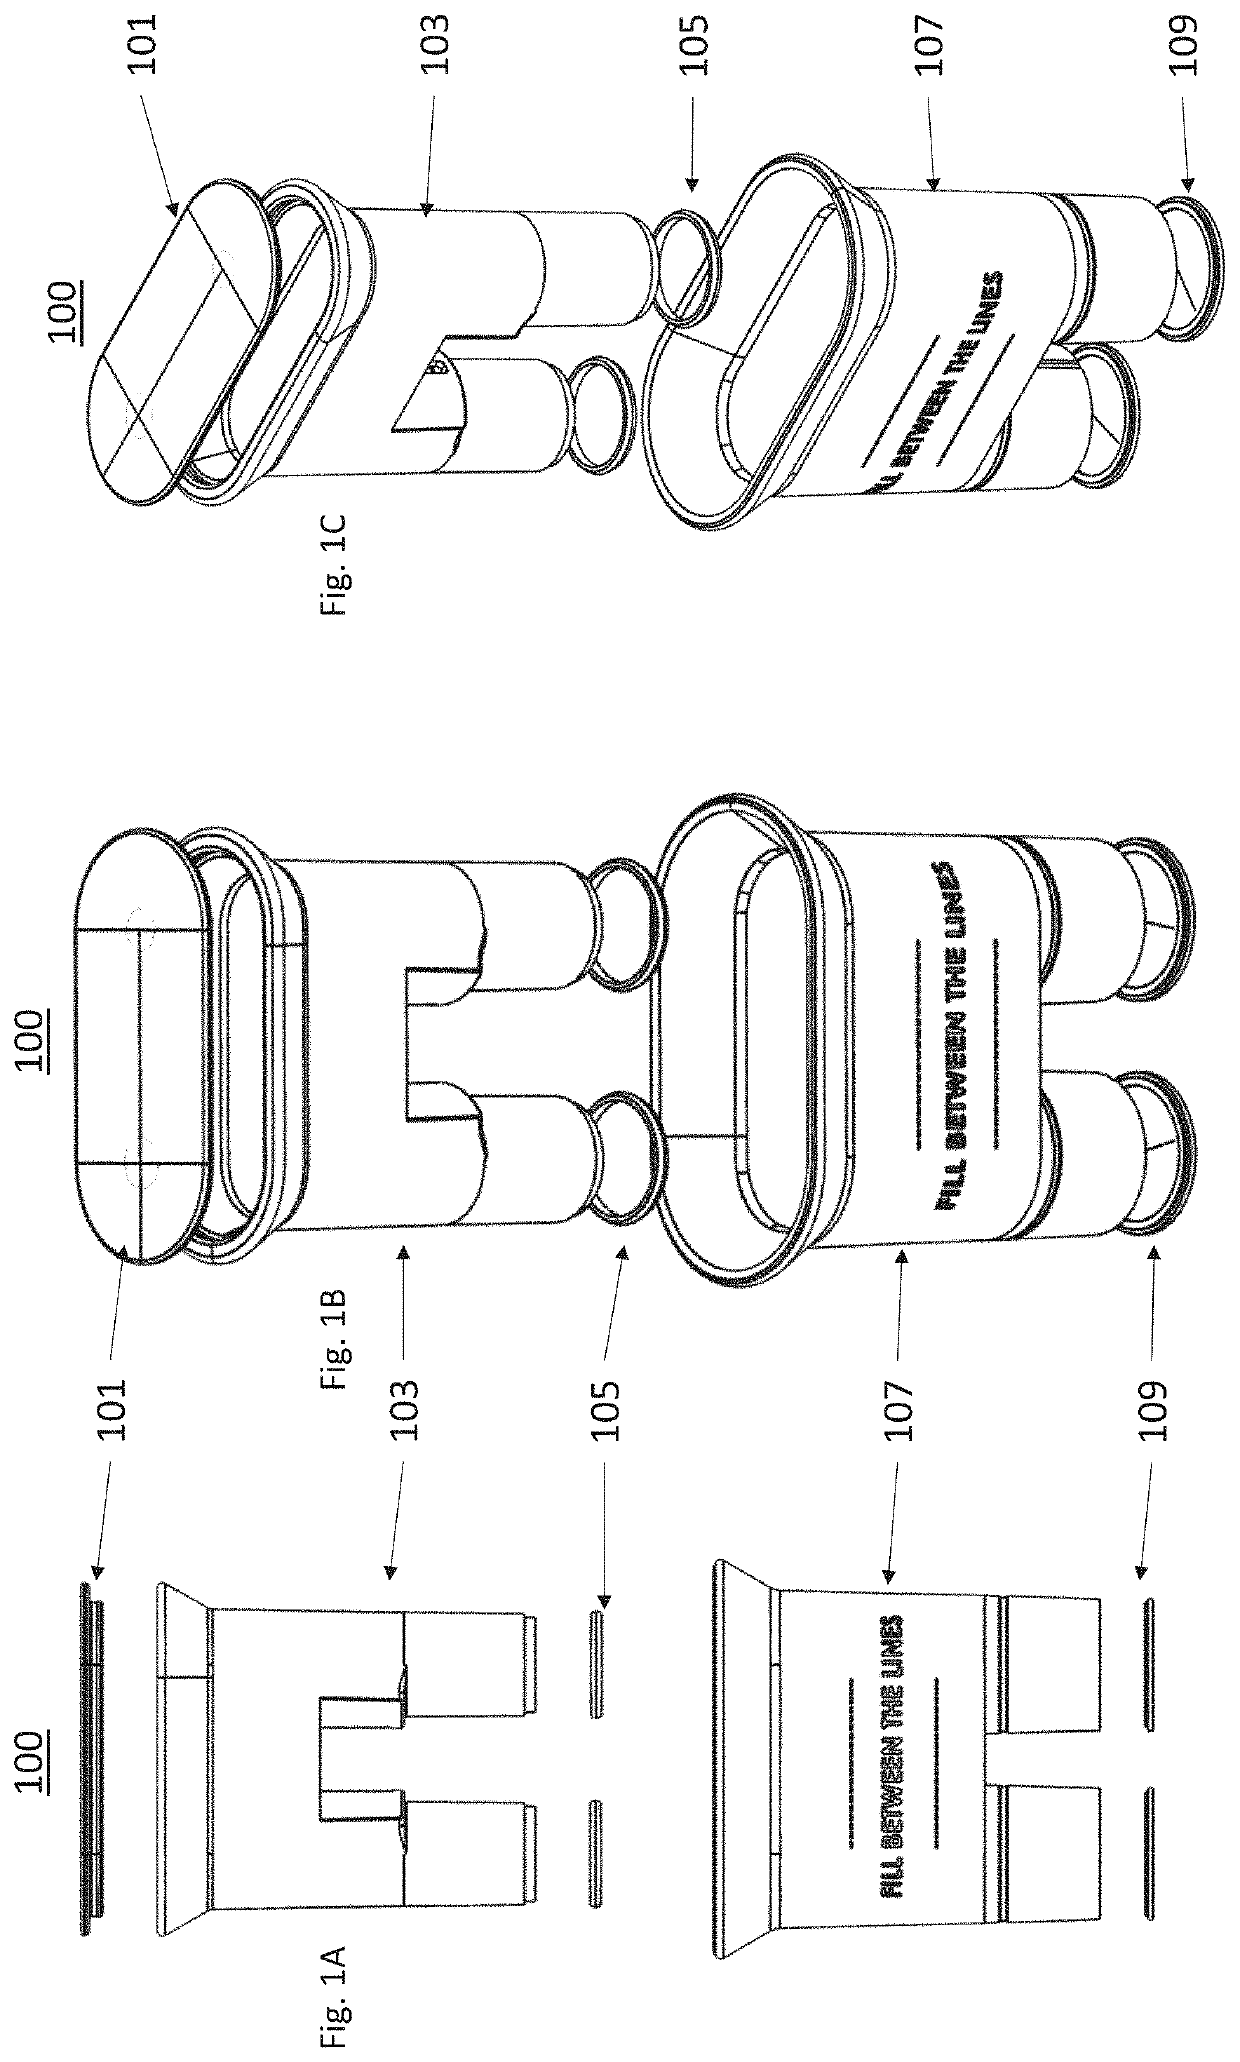 Oral fluid collection device